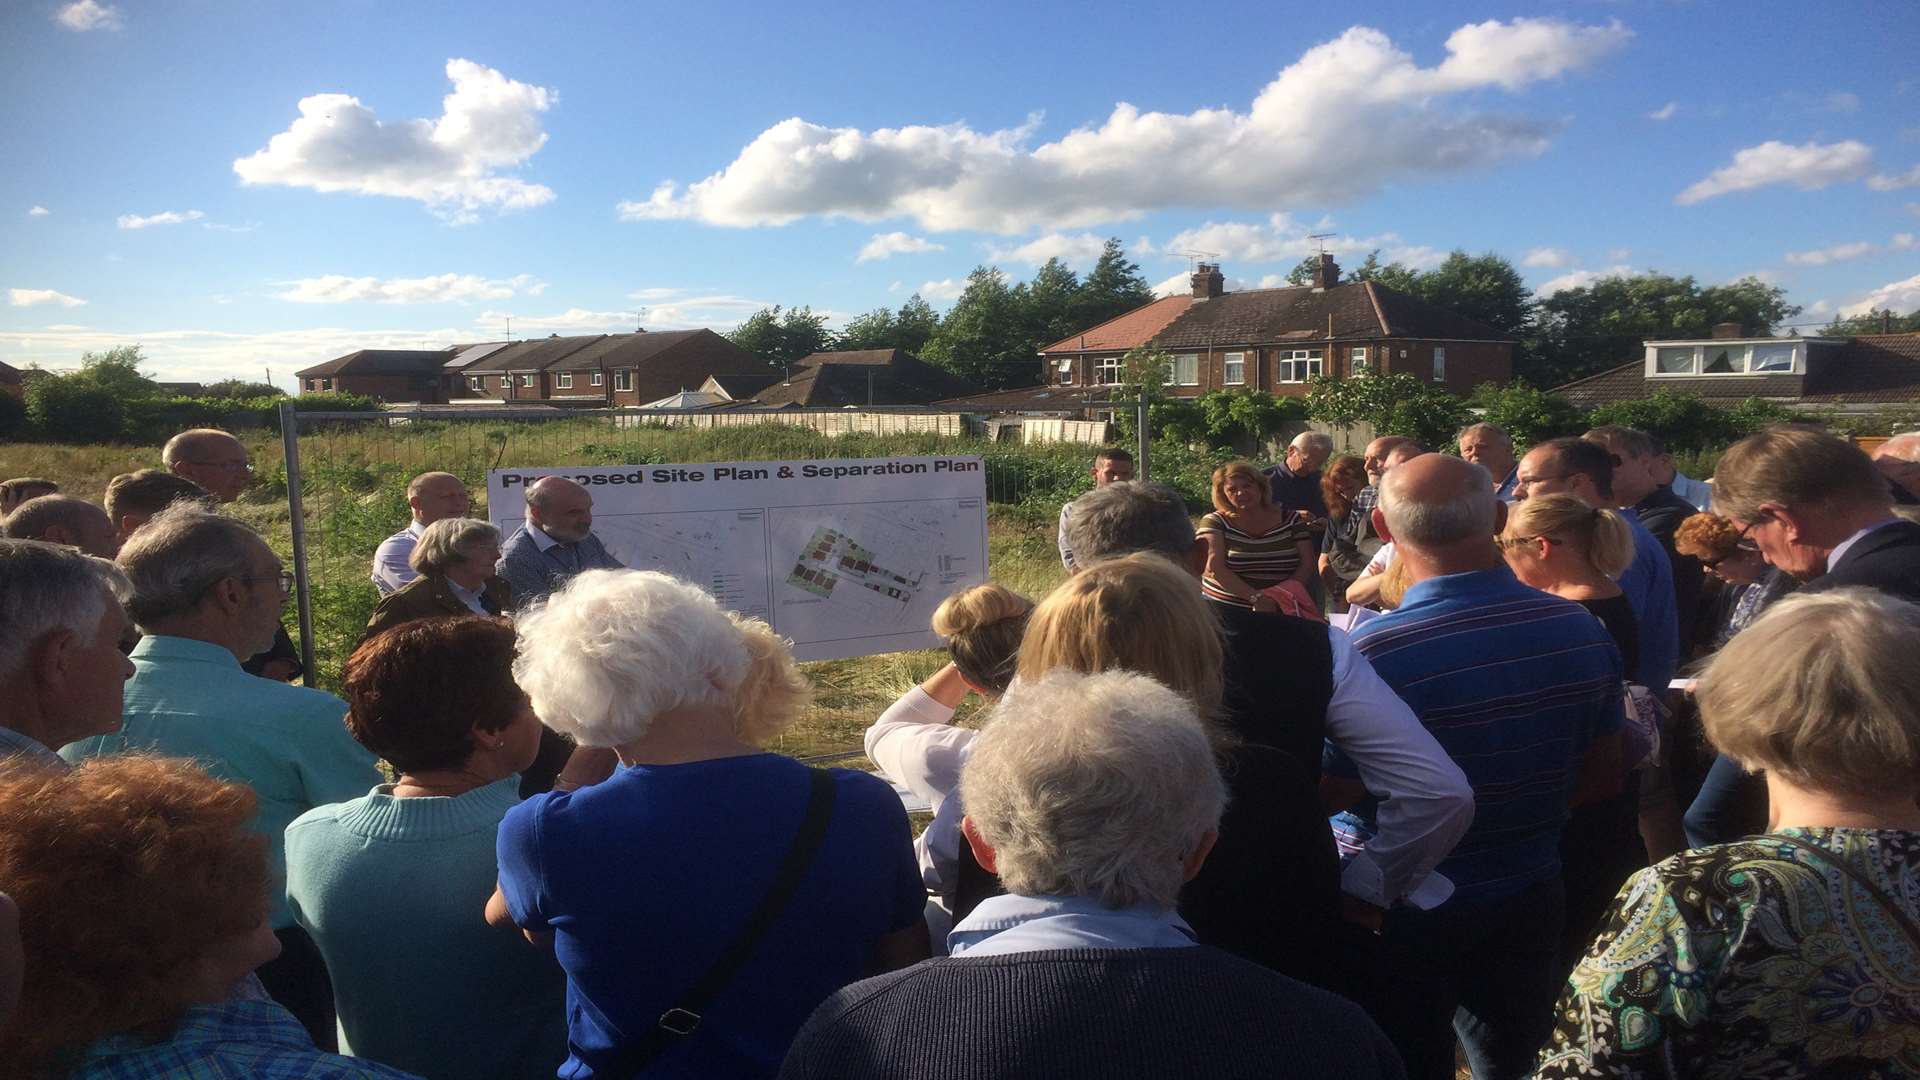 Residents gathered to show anger at plans for a housing development on Berengrave Lane